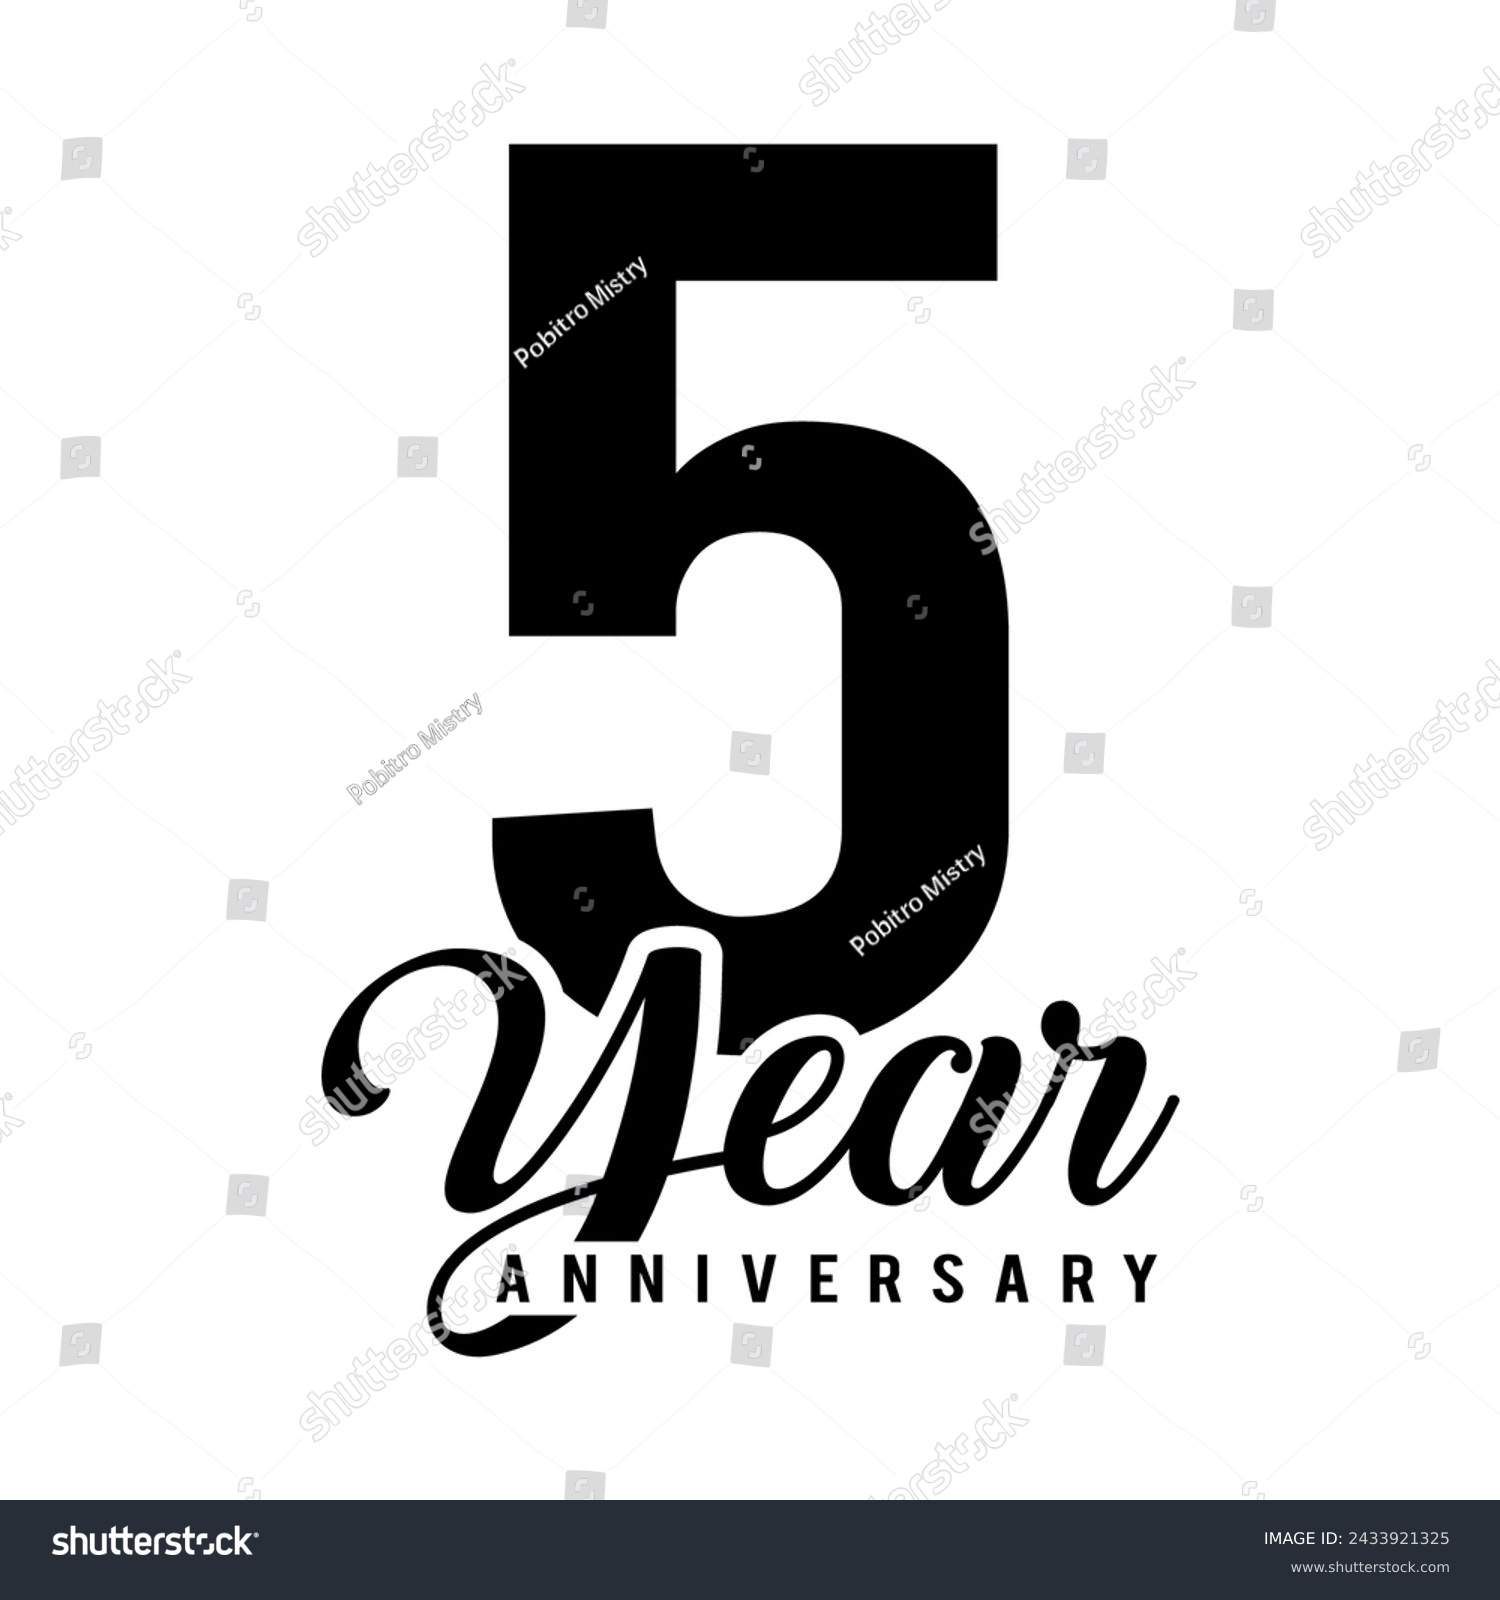 SVG of 5 Year Anniversary wedding wish lettering text vector illustration. svg